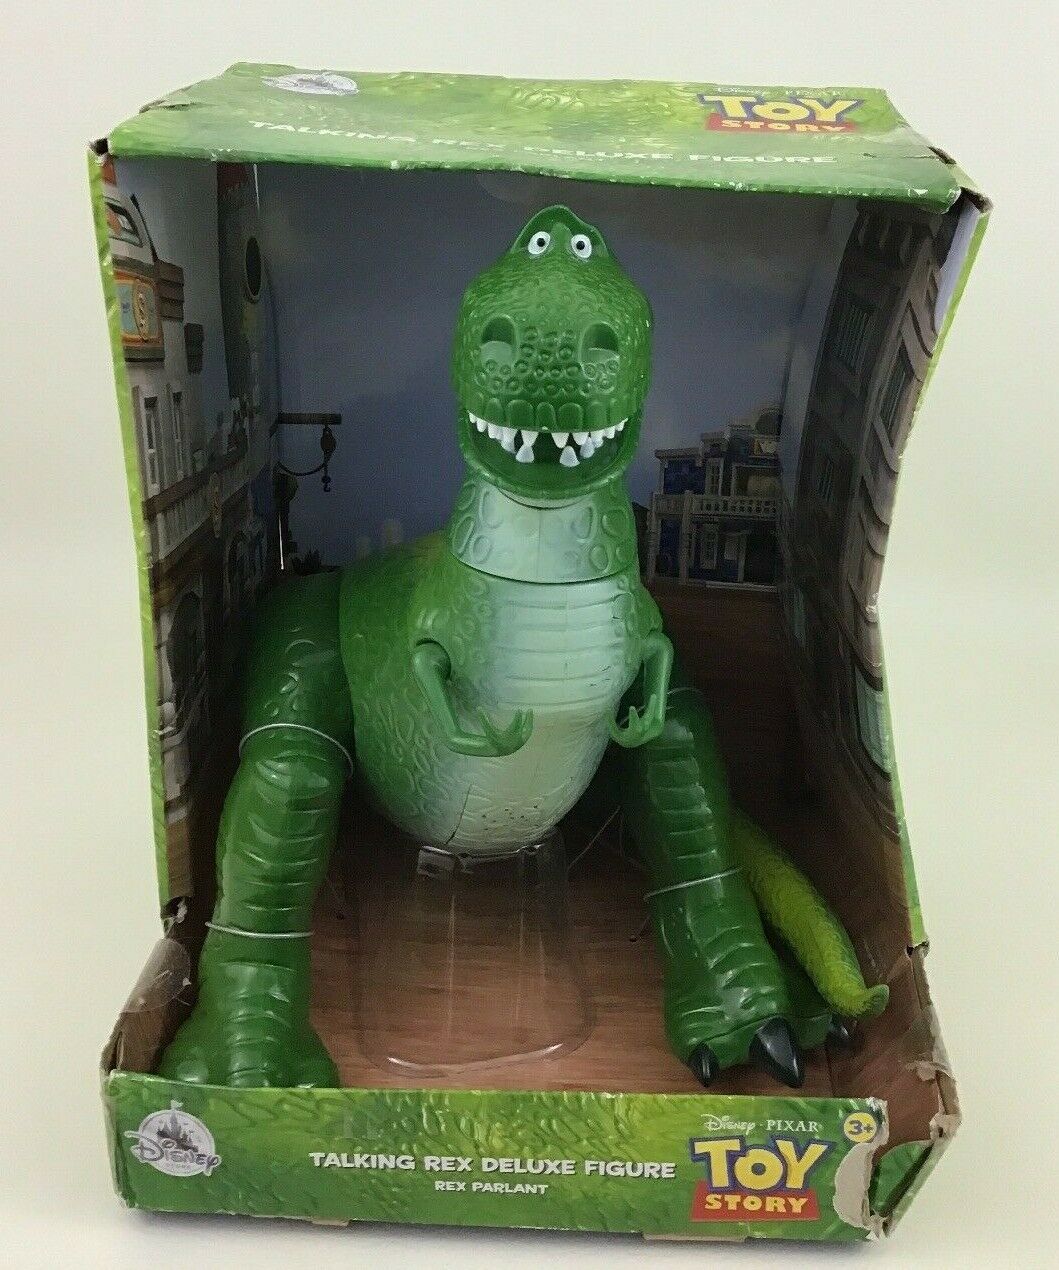 Toy Story Talking Rex Deluxe Figure Dinosaur Disney Store Parks New In Box TV Movie